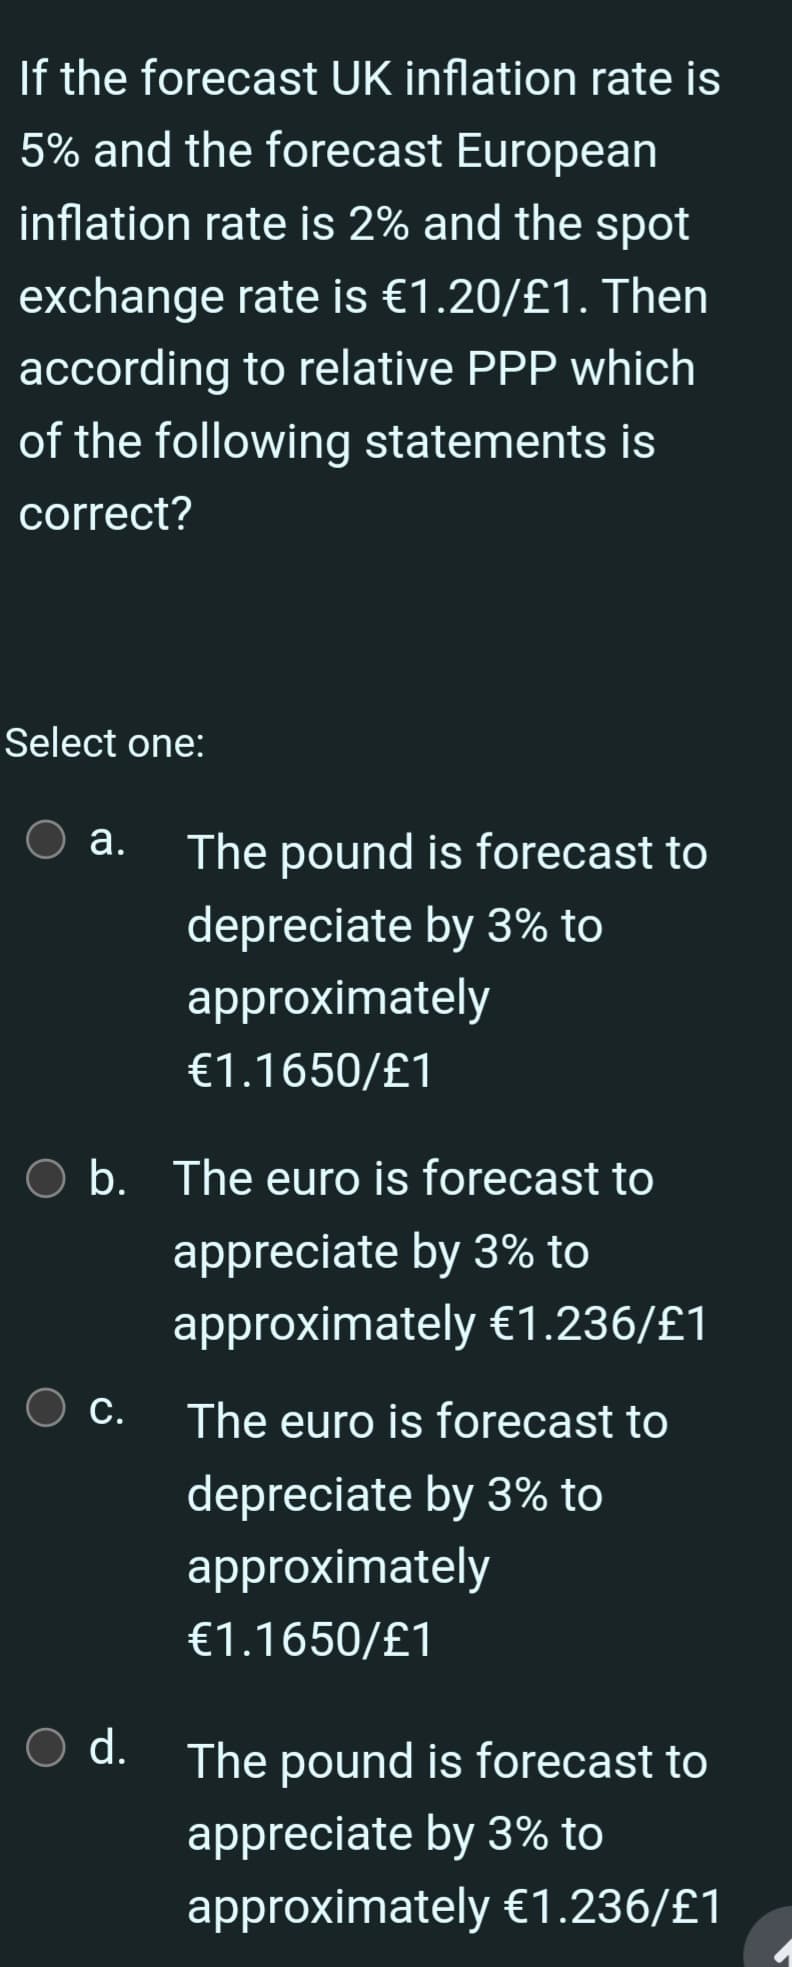 If the forecast UK inflation rate is
5% and the forecast European
inflation rate is 2% and the spot
exchange rate is €1.20/£1. Then
according to relative PPP which
of the following statements is
correct?
Select one:
a.
O b. The euro is forecast to
appreciate by 3% to
approximately €1.236/£1
O c.
The pound is forecast to
depreciate by 3% to
approximately
€1.1650/£1
O d.
The euro is forecast to
depreciate by 3% to
approximately
€1.1650/£1
The pound is forecast to
appreciate by 3% to
approximately €1.236/£1